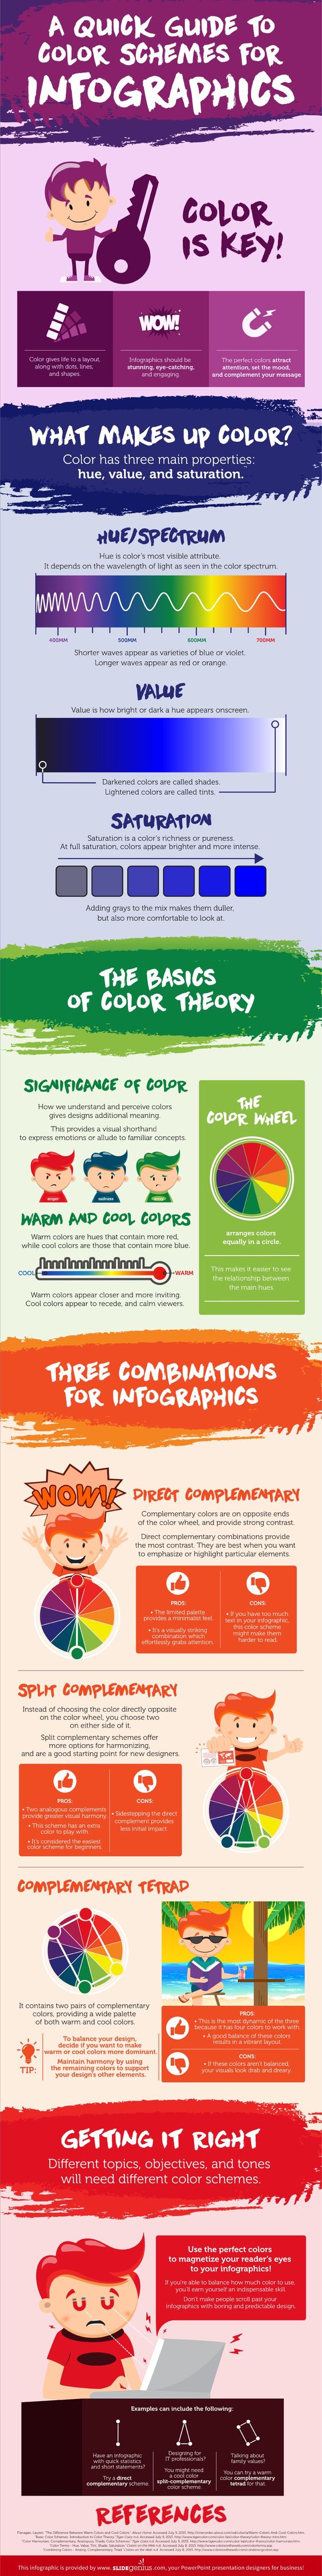 A Quick Guide To Color Schemes For Infographics